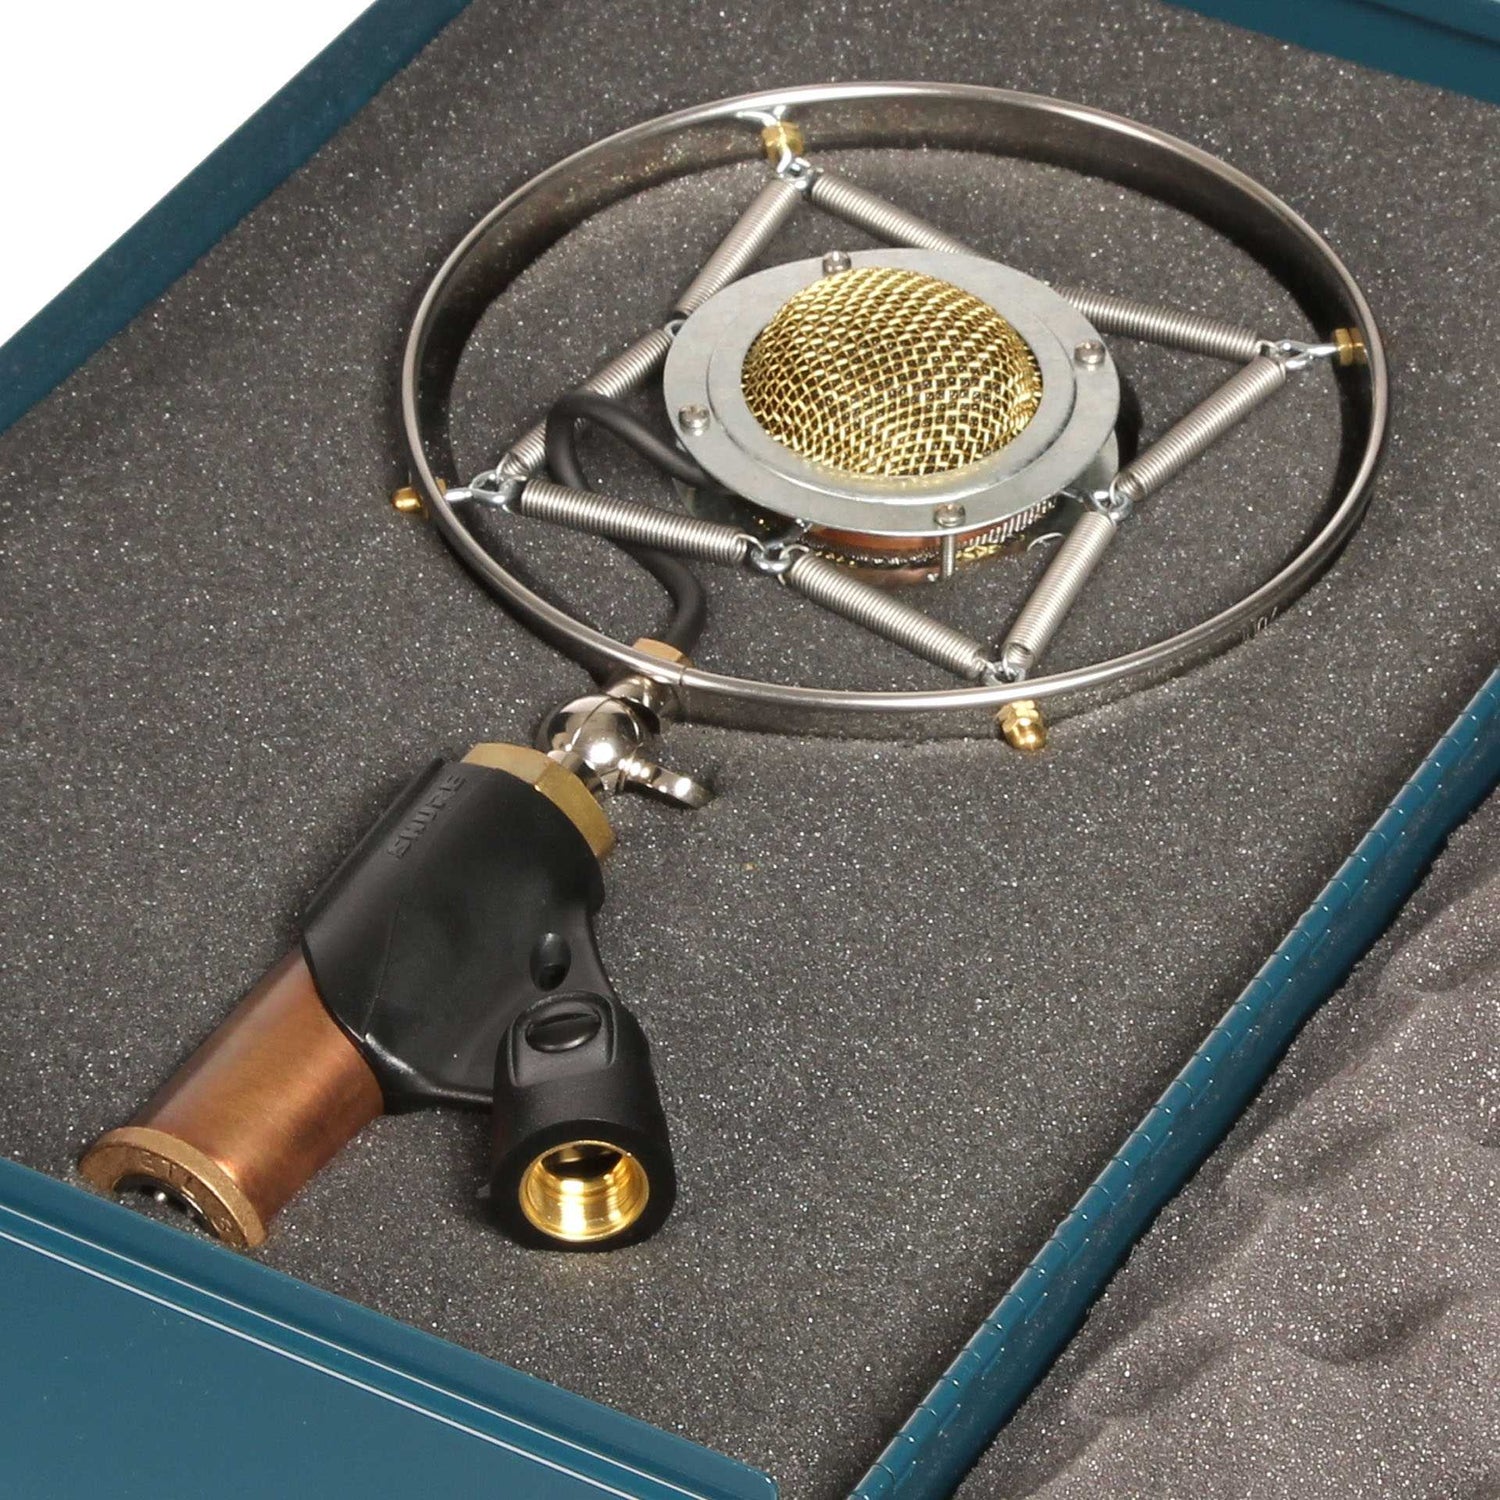 Full Front of Ear Trumpet Labs Myrtle Condenser Microphone in Case